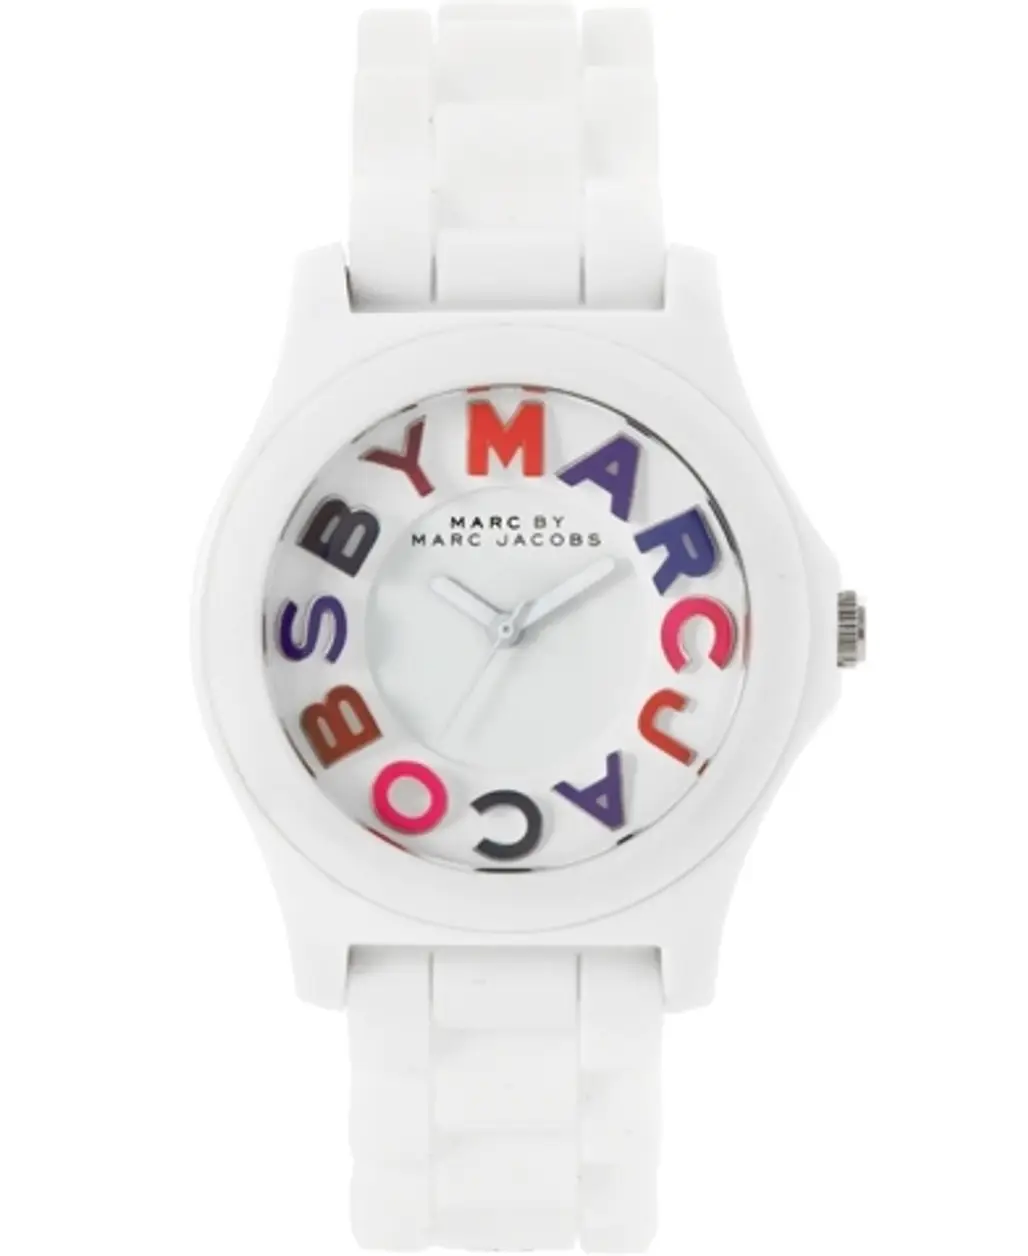 Marc by Marc Jacobs White Bracelet Watch